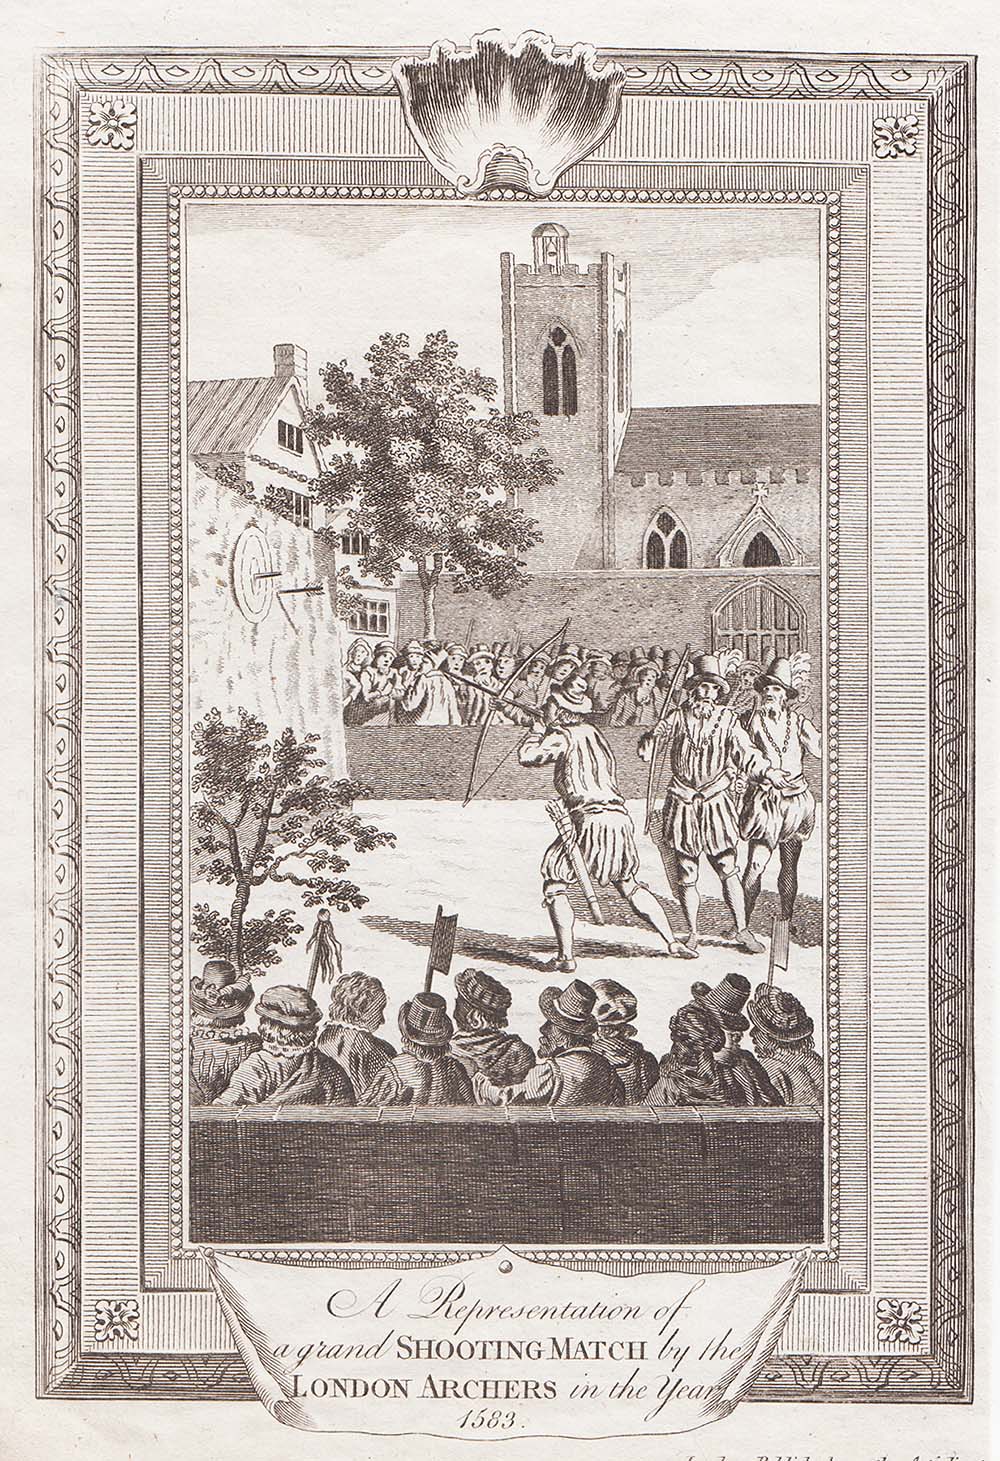 A Representations of a grand Shooting Match by the London Archers in the Year 1583.